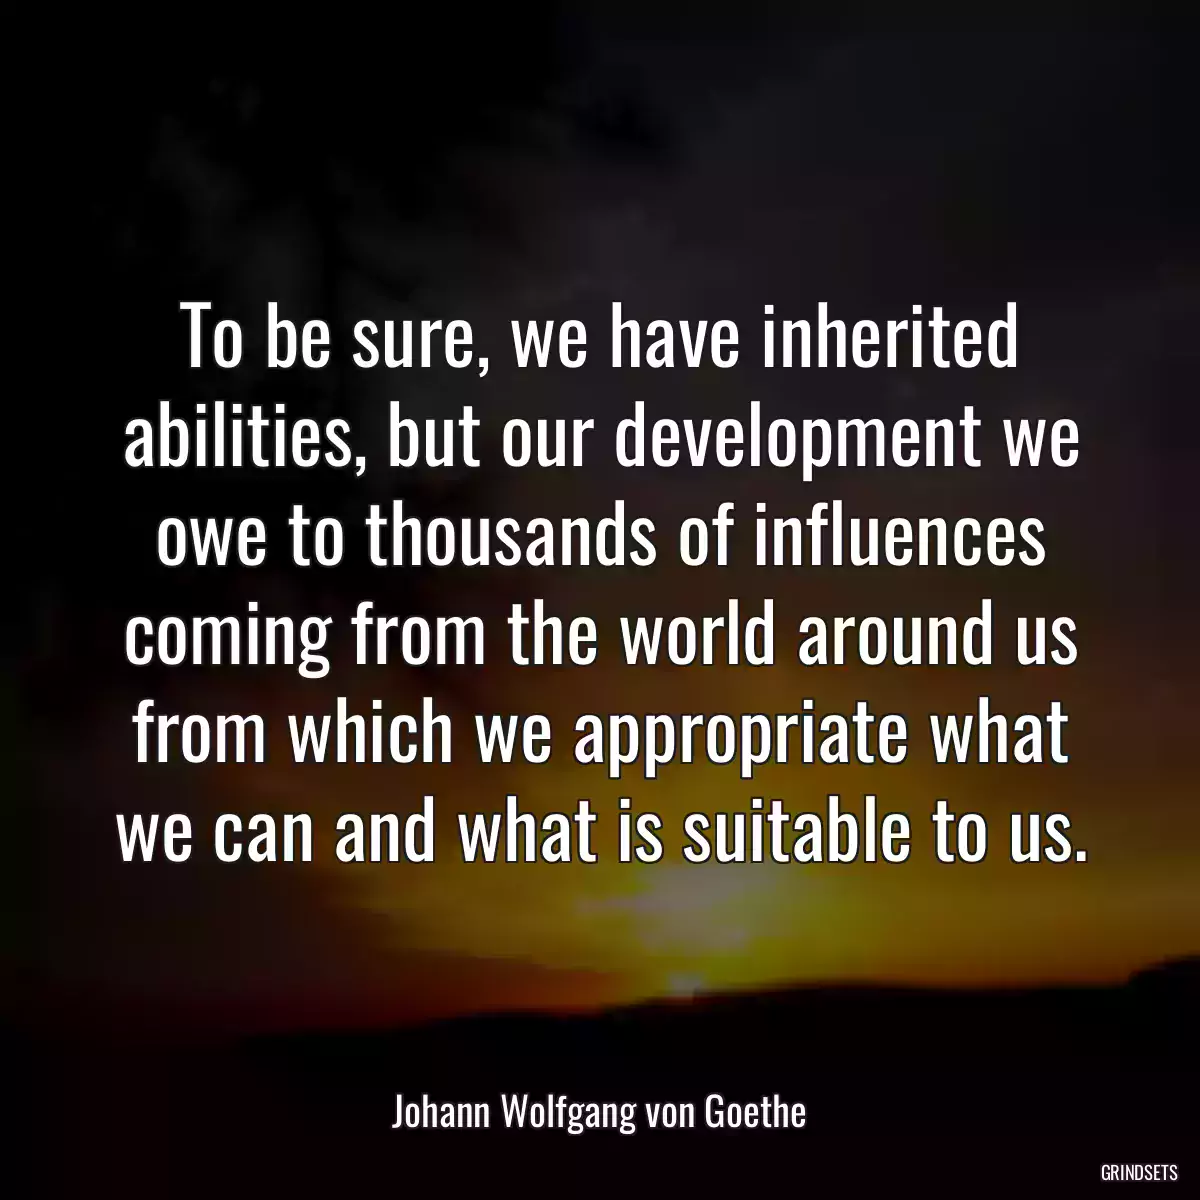 To be sure, we have inherited abilities, but our development we owe to thousands of influences coming from the world around us from which we appropriate what we can and what is suitable to us.